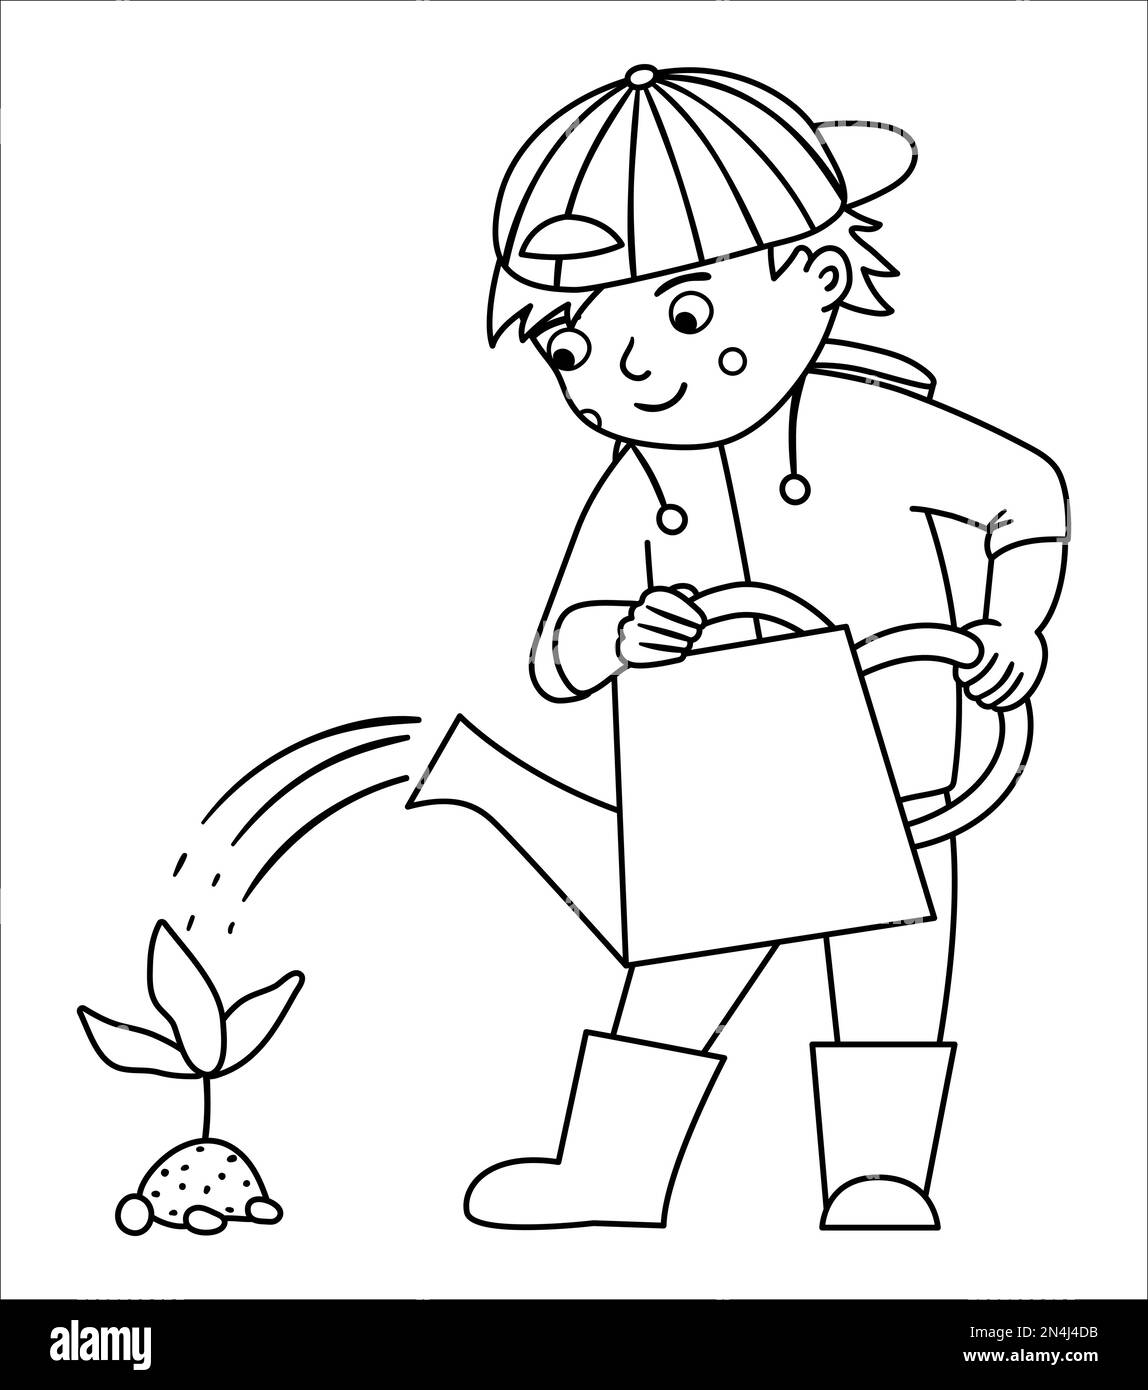 Vector black and white boy watering plant illustration. Cute outline ...